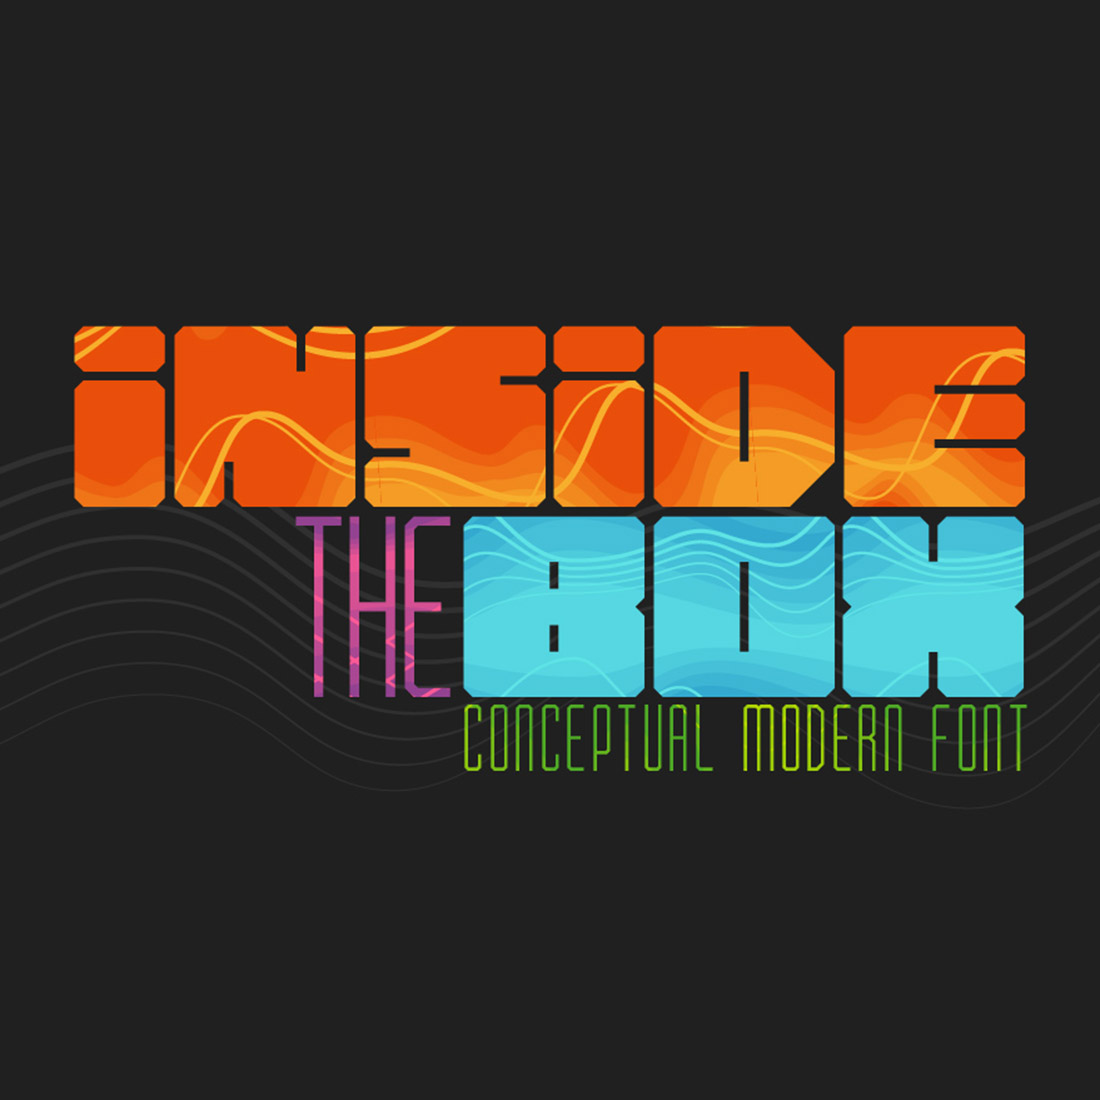 Inside the BOX Font Design and Seamless Patterns cover image.